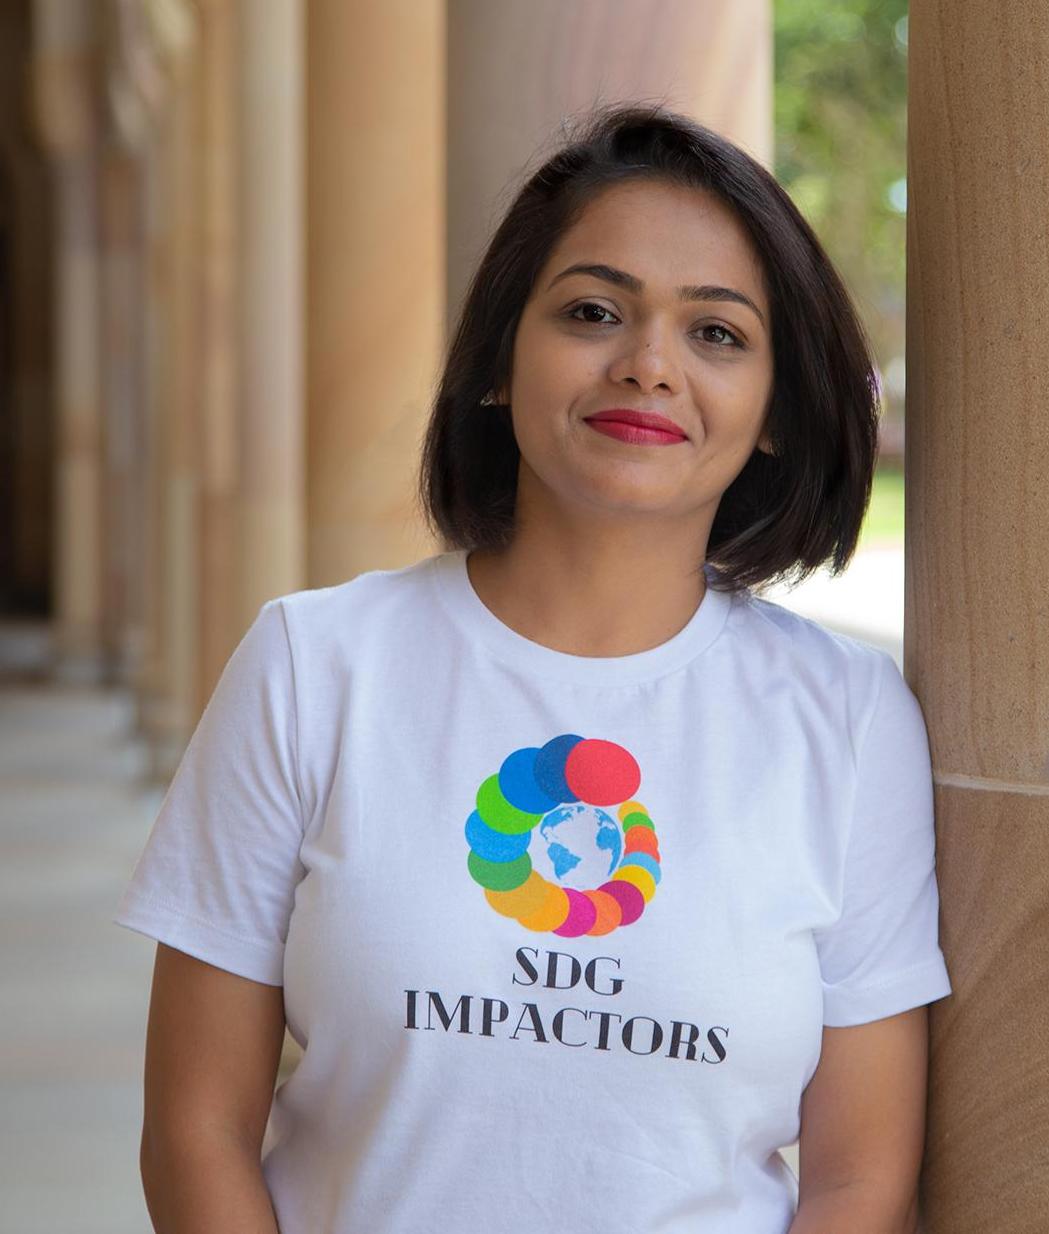 Runali wearing t-shirt with SDG colours representing the 17 UN goals